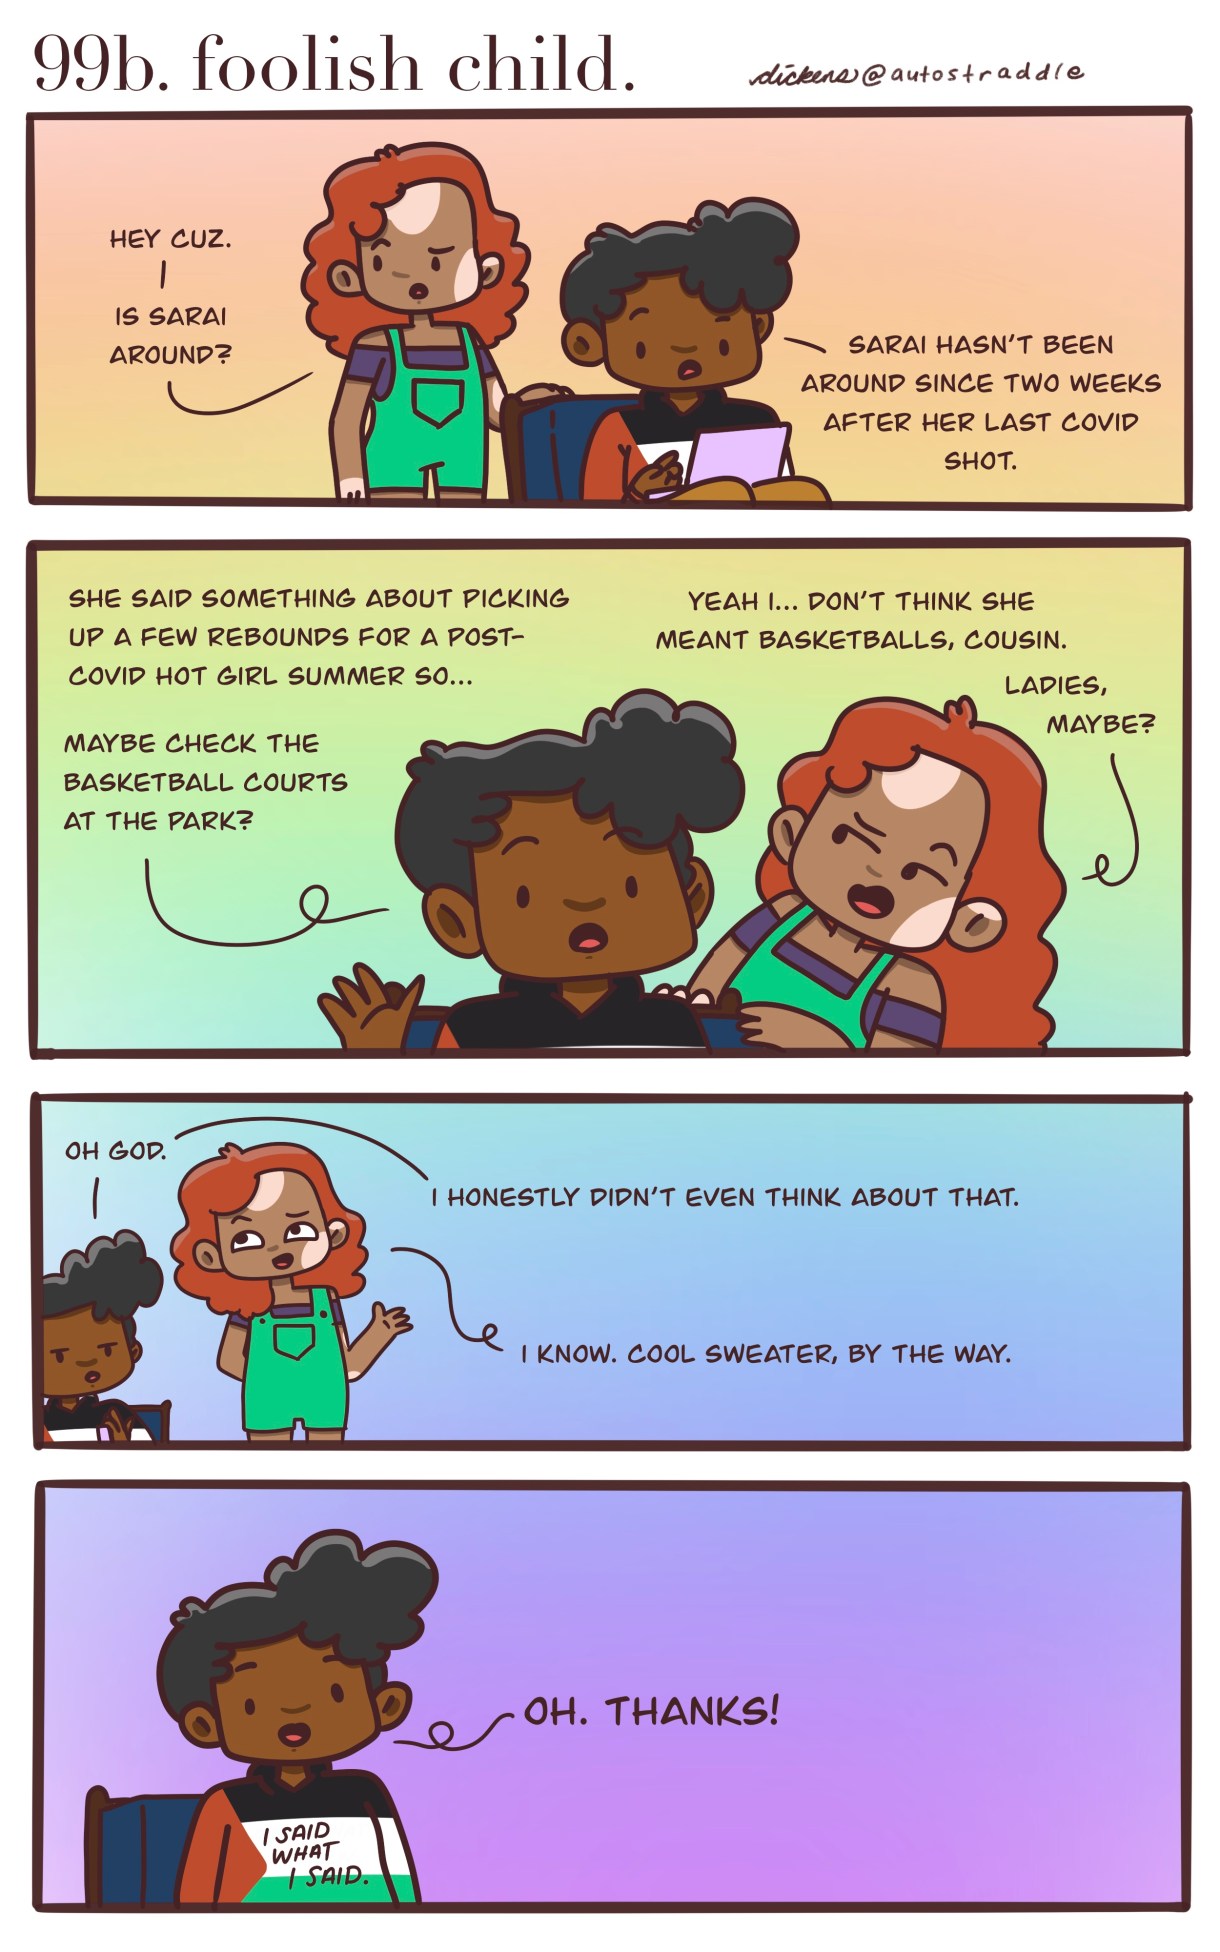 In a four panel rainbow background comic, Dickens friend asks where Saia is, Dickens responds that they are looking for a rebound for a post-Covid Hot Girl Summer and to check the basketball courts. Their friend laughs and says that rebounds probably means girls, not basketballs. The friend goes on to say that they like Dickens shirt. The panel pulls out to reveal a sweater in the colors of the Palestinian flag with the words "I said what I said" on it.